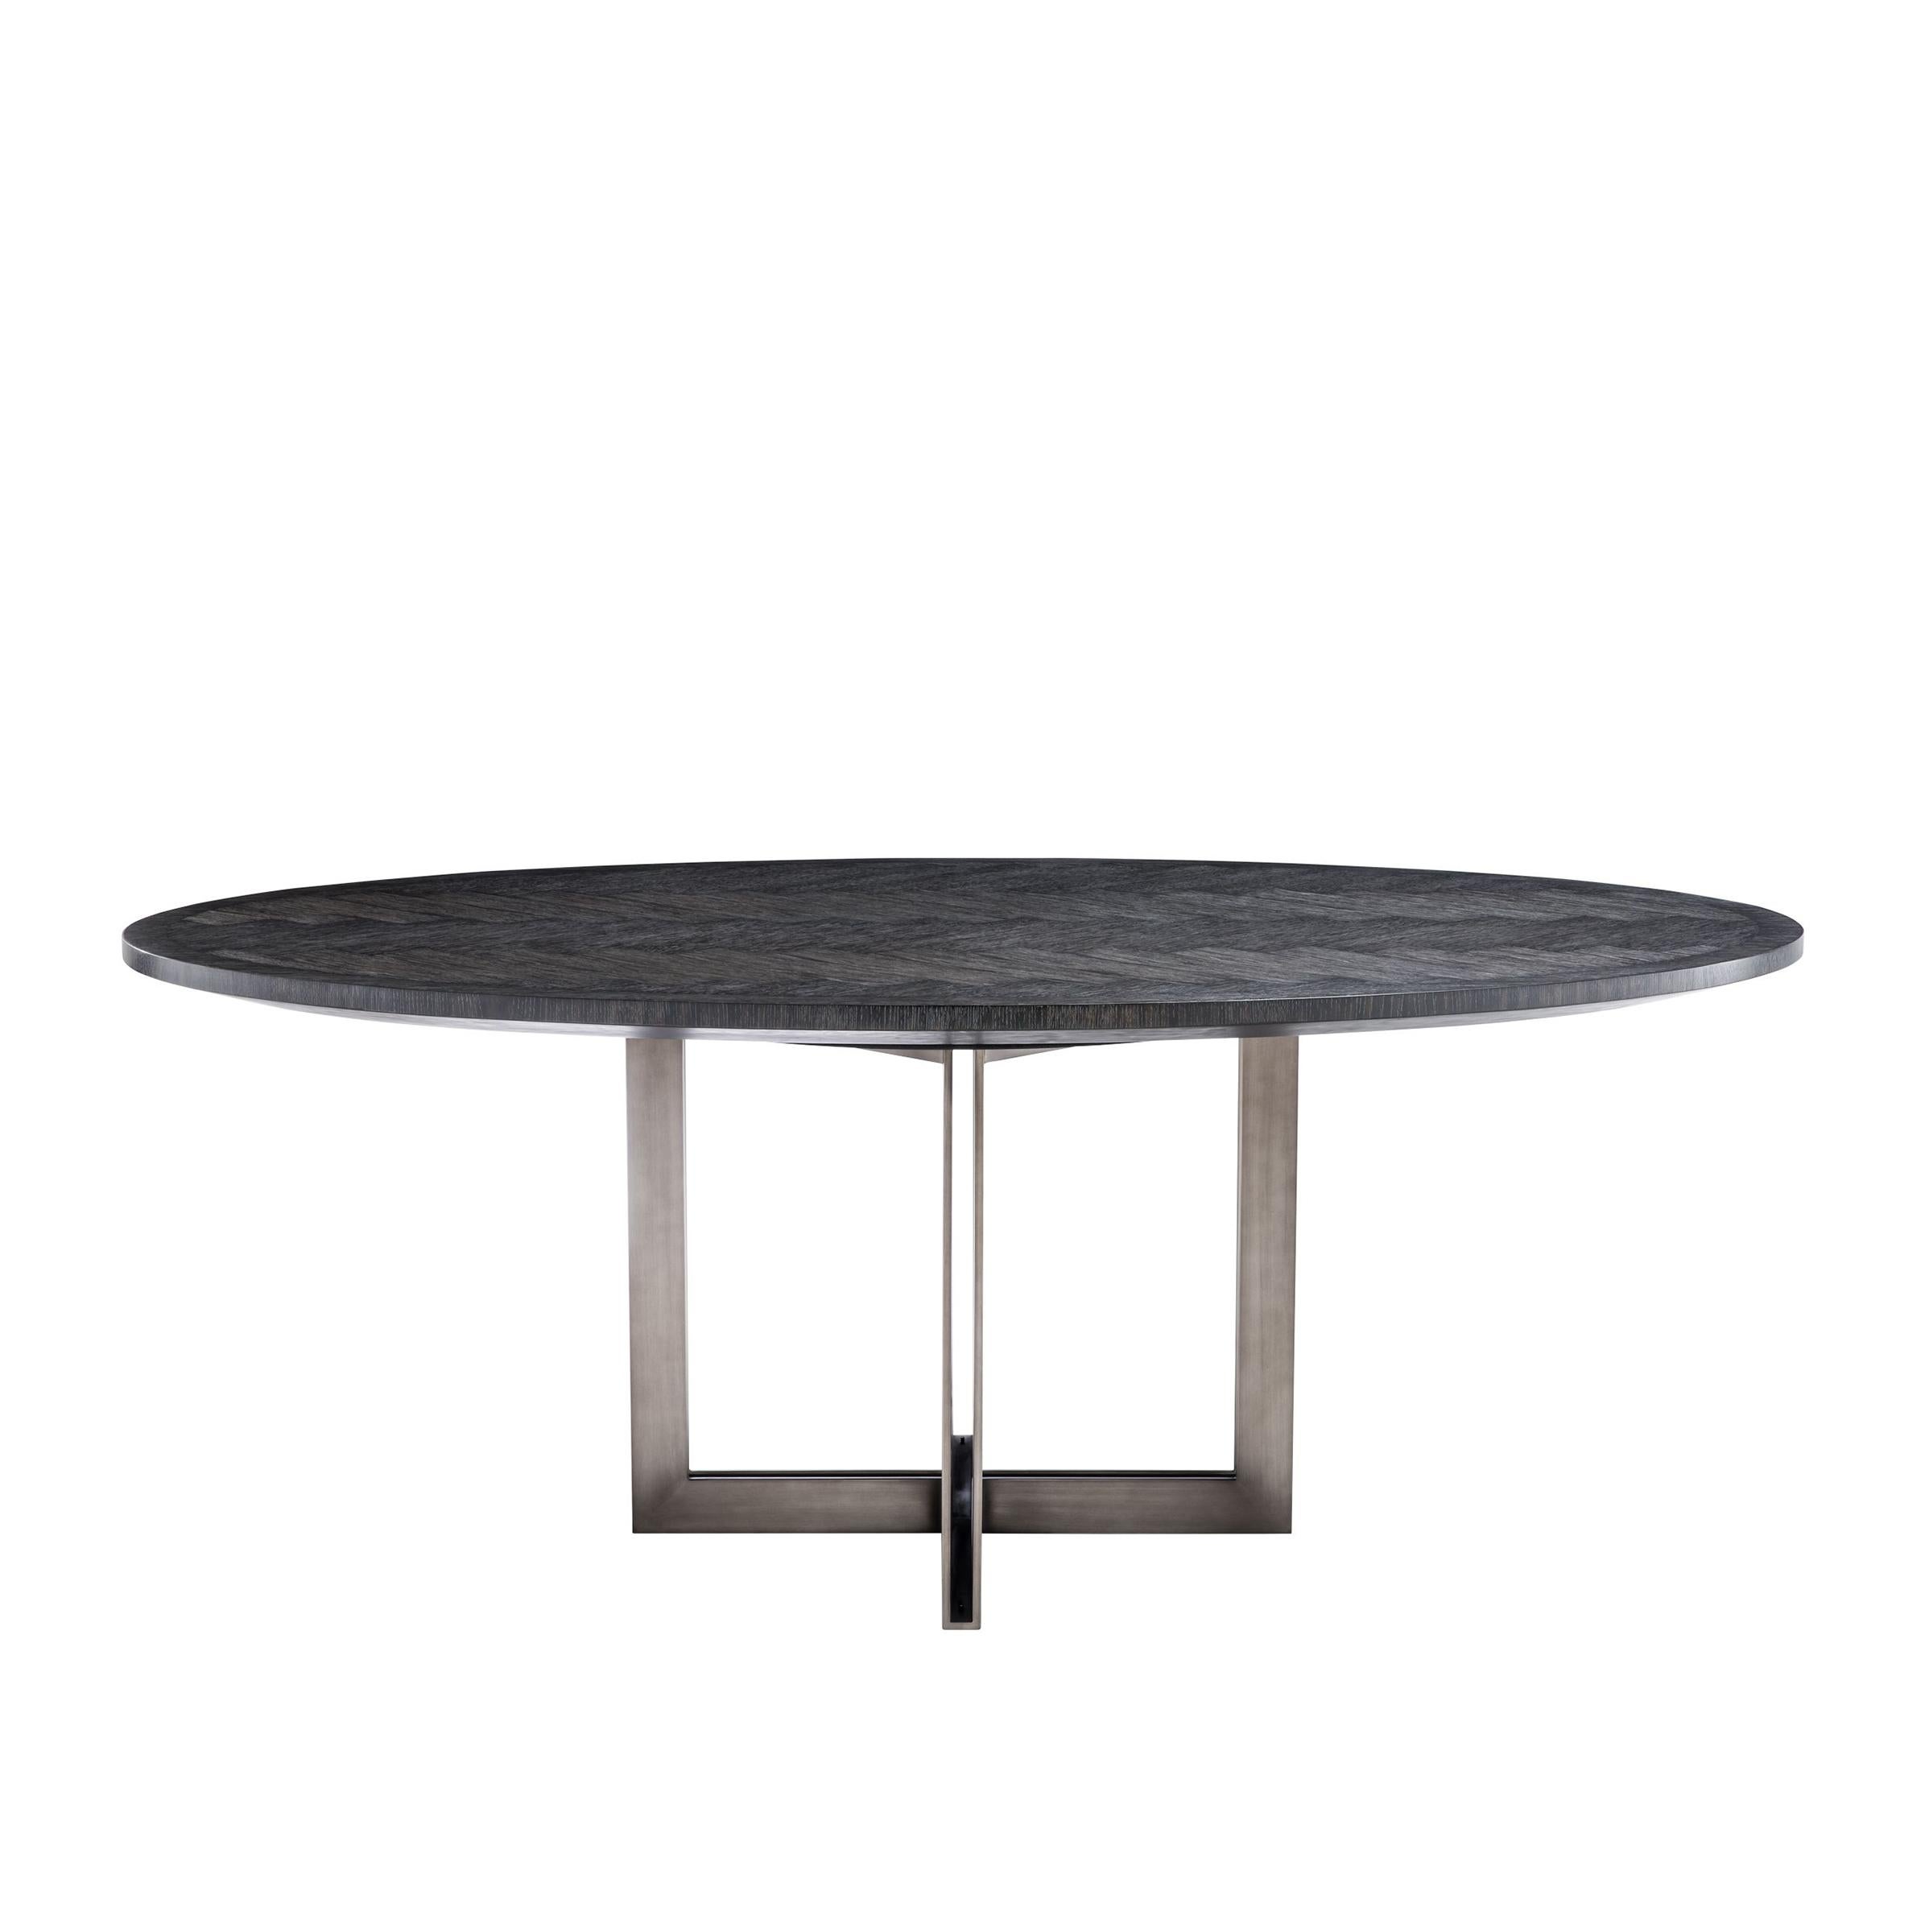 Indonesian Brass Oval Black Dining Table